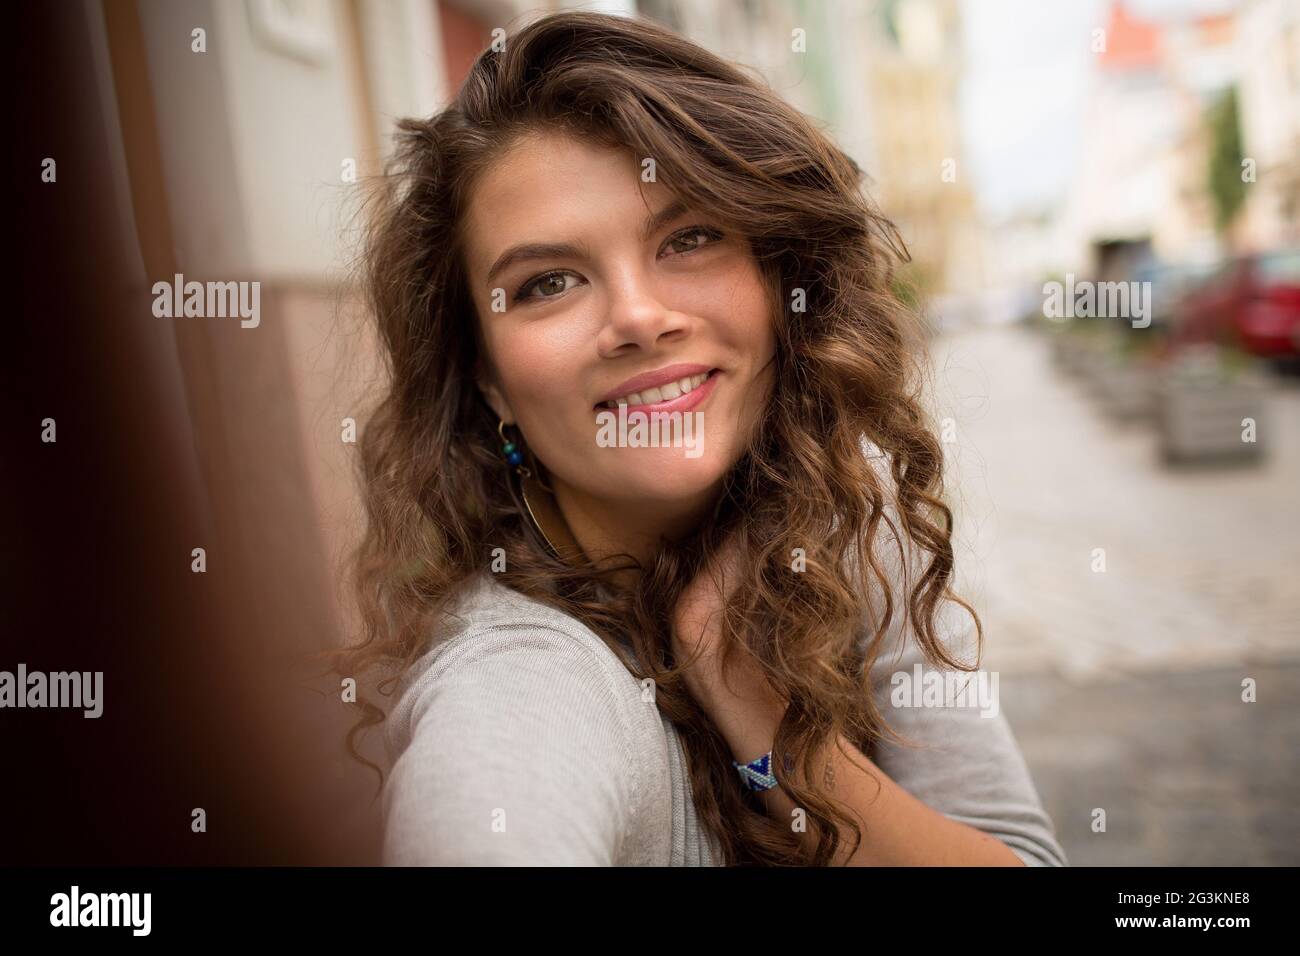 Travel girl taking selfie shot, showing emotions of happiness. Stock Photo